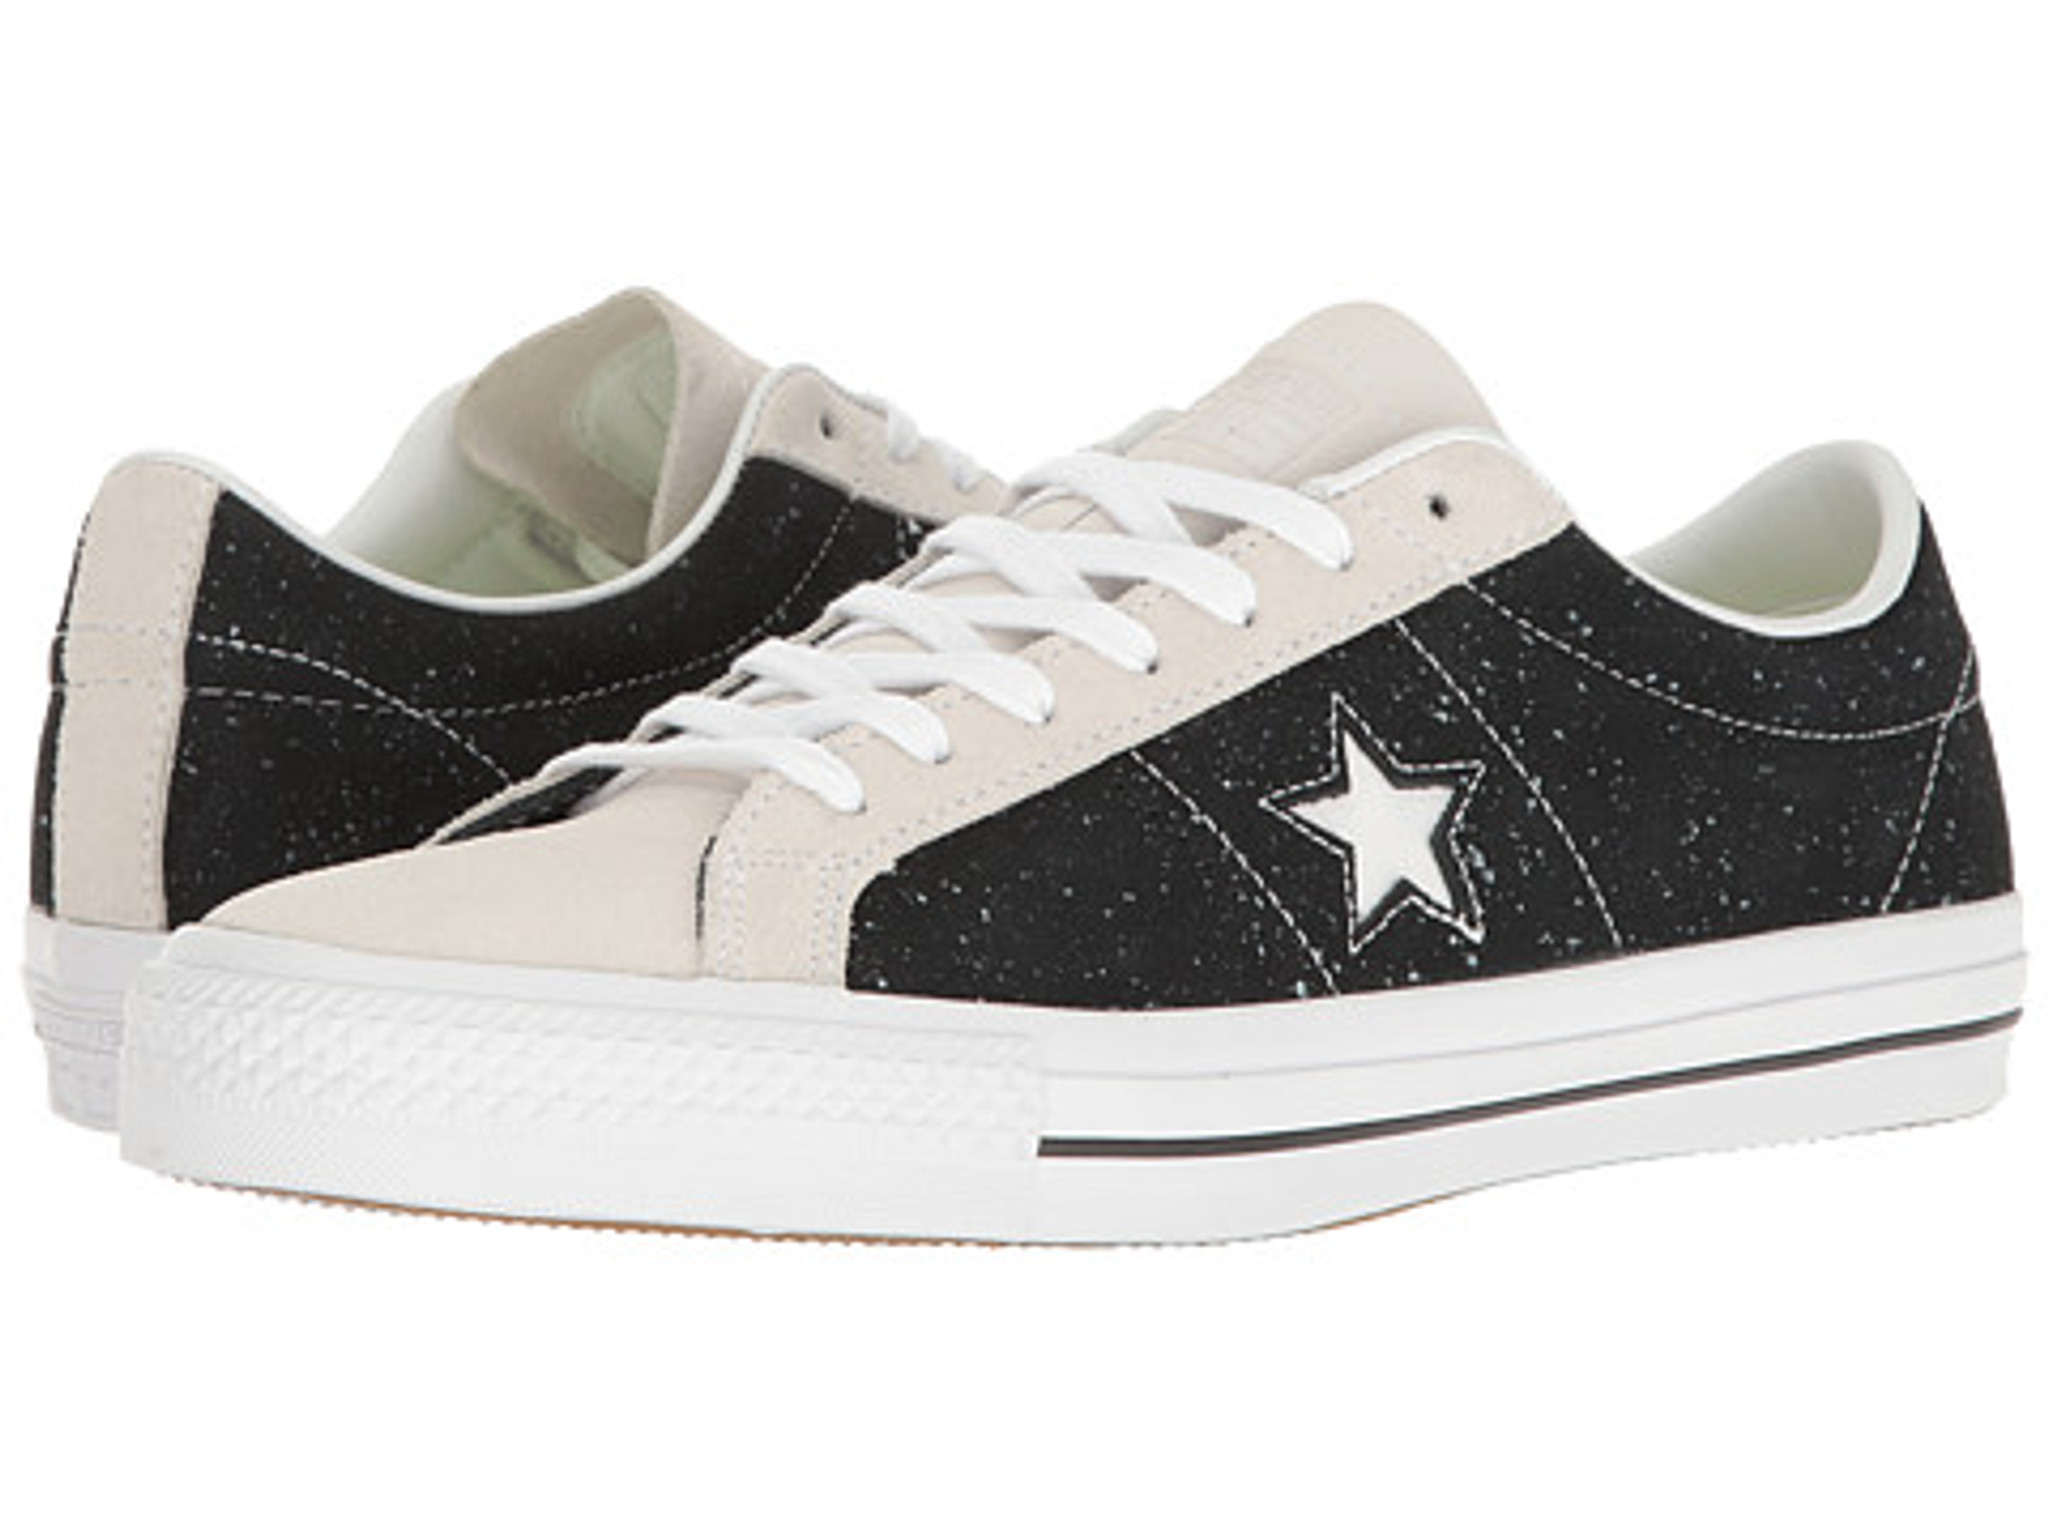 Converse CONS One Star Pro Speckled Suede Low Top FREE SHIPPING SKateboard Shoes FREE SHIPPING